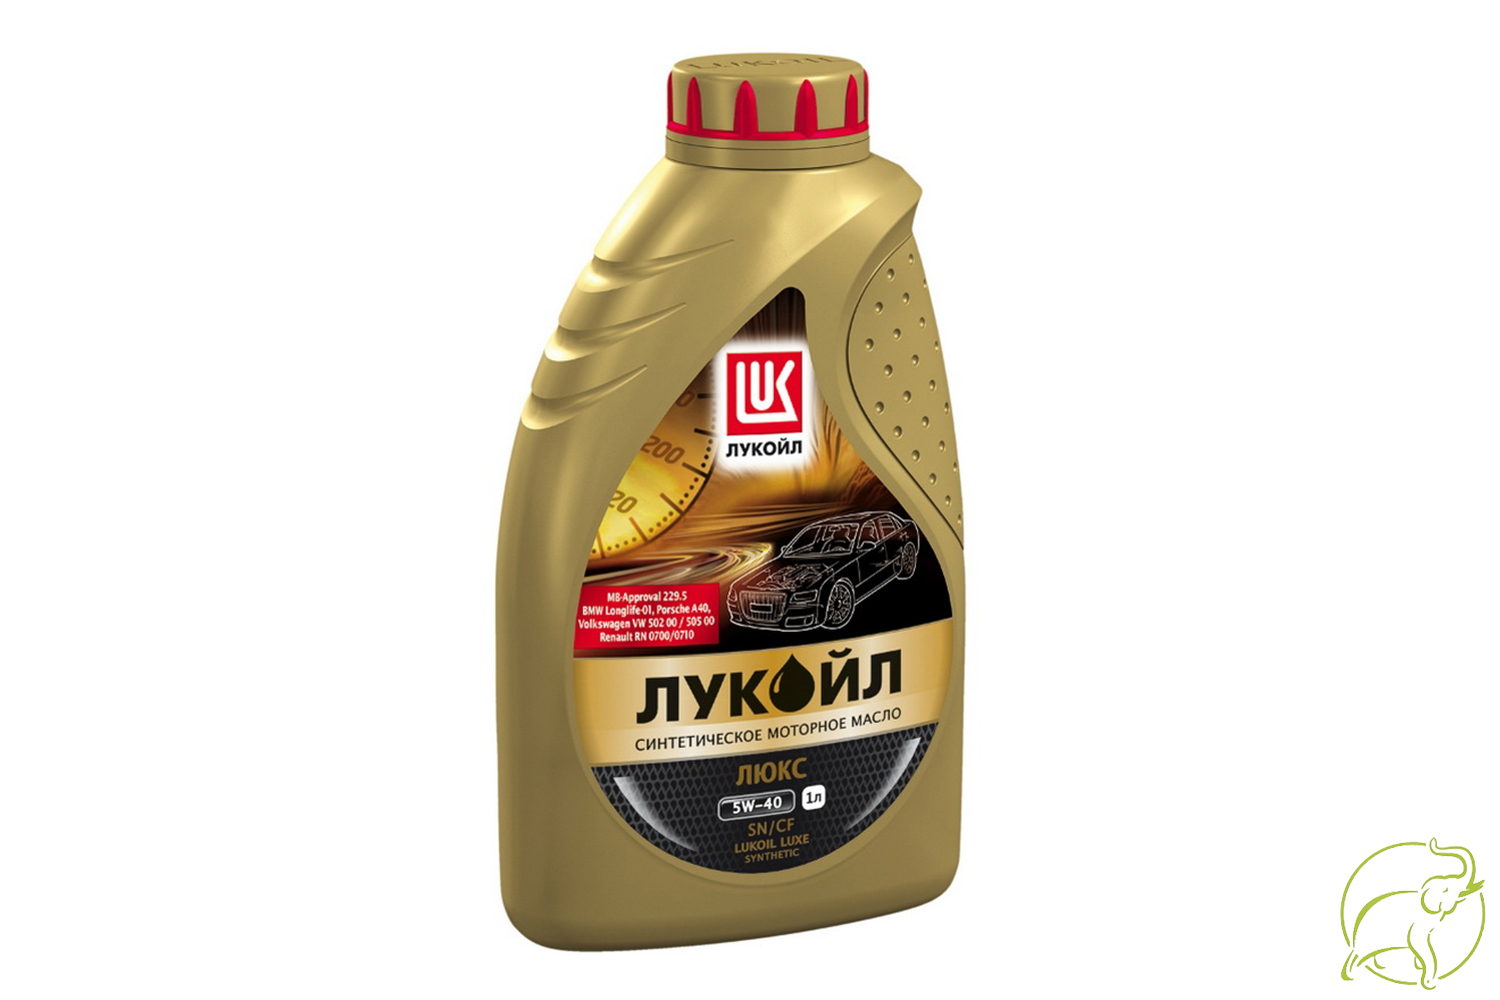 Масло лукойл 5 w 40